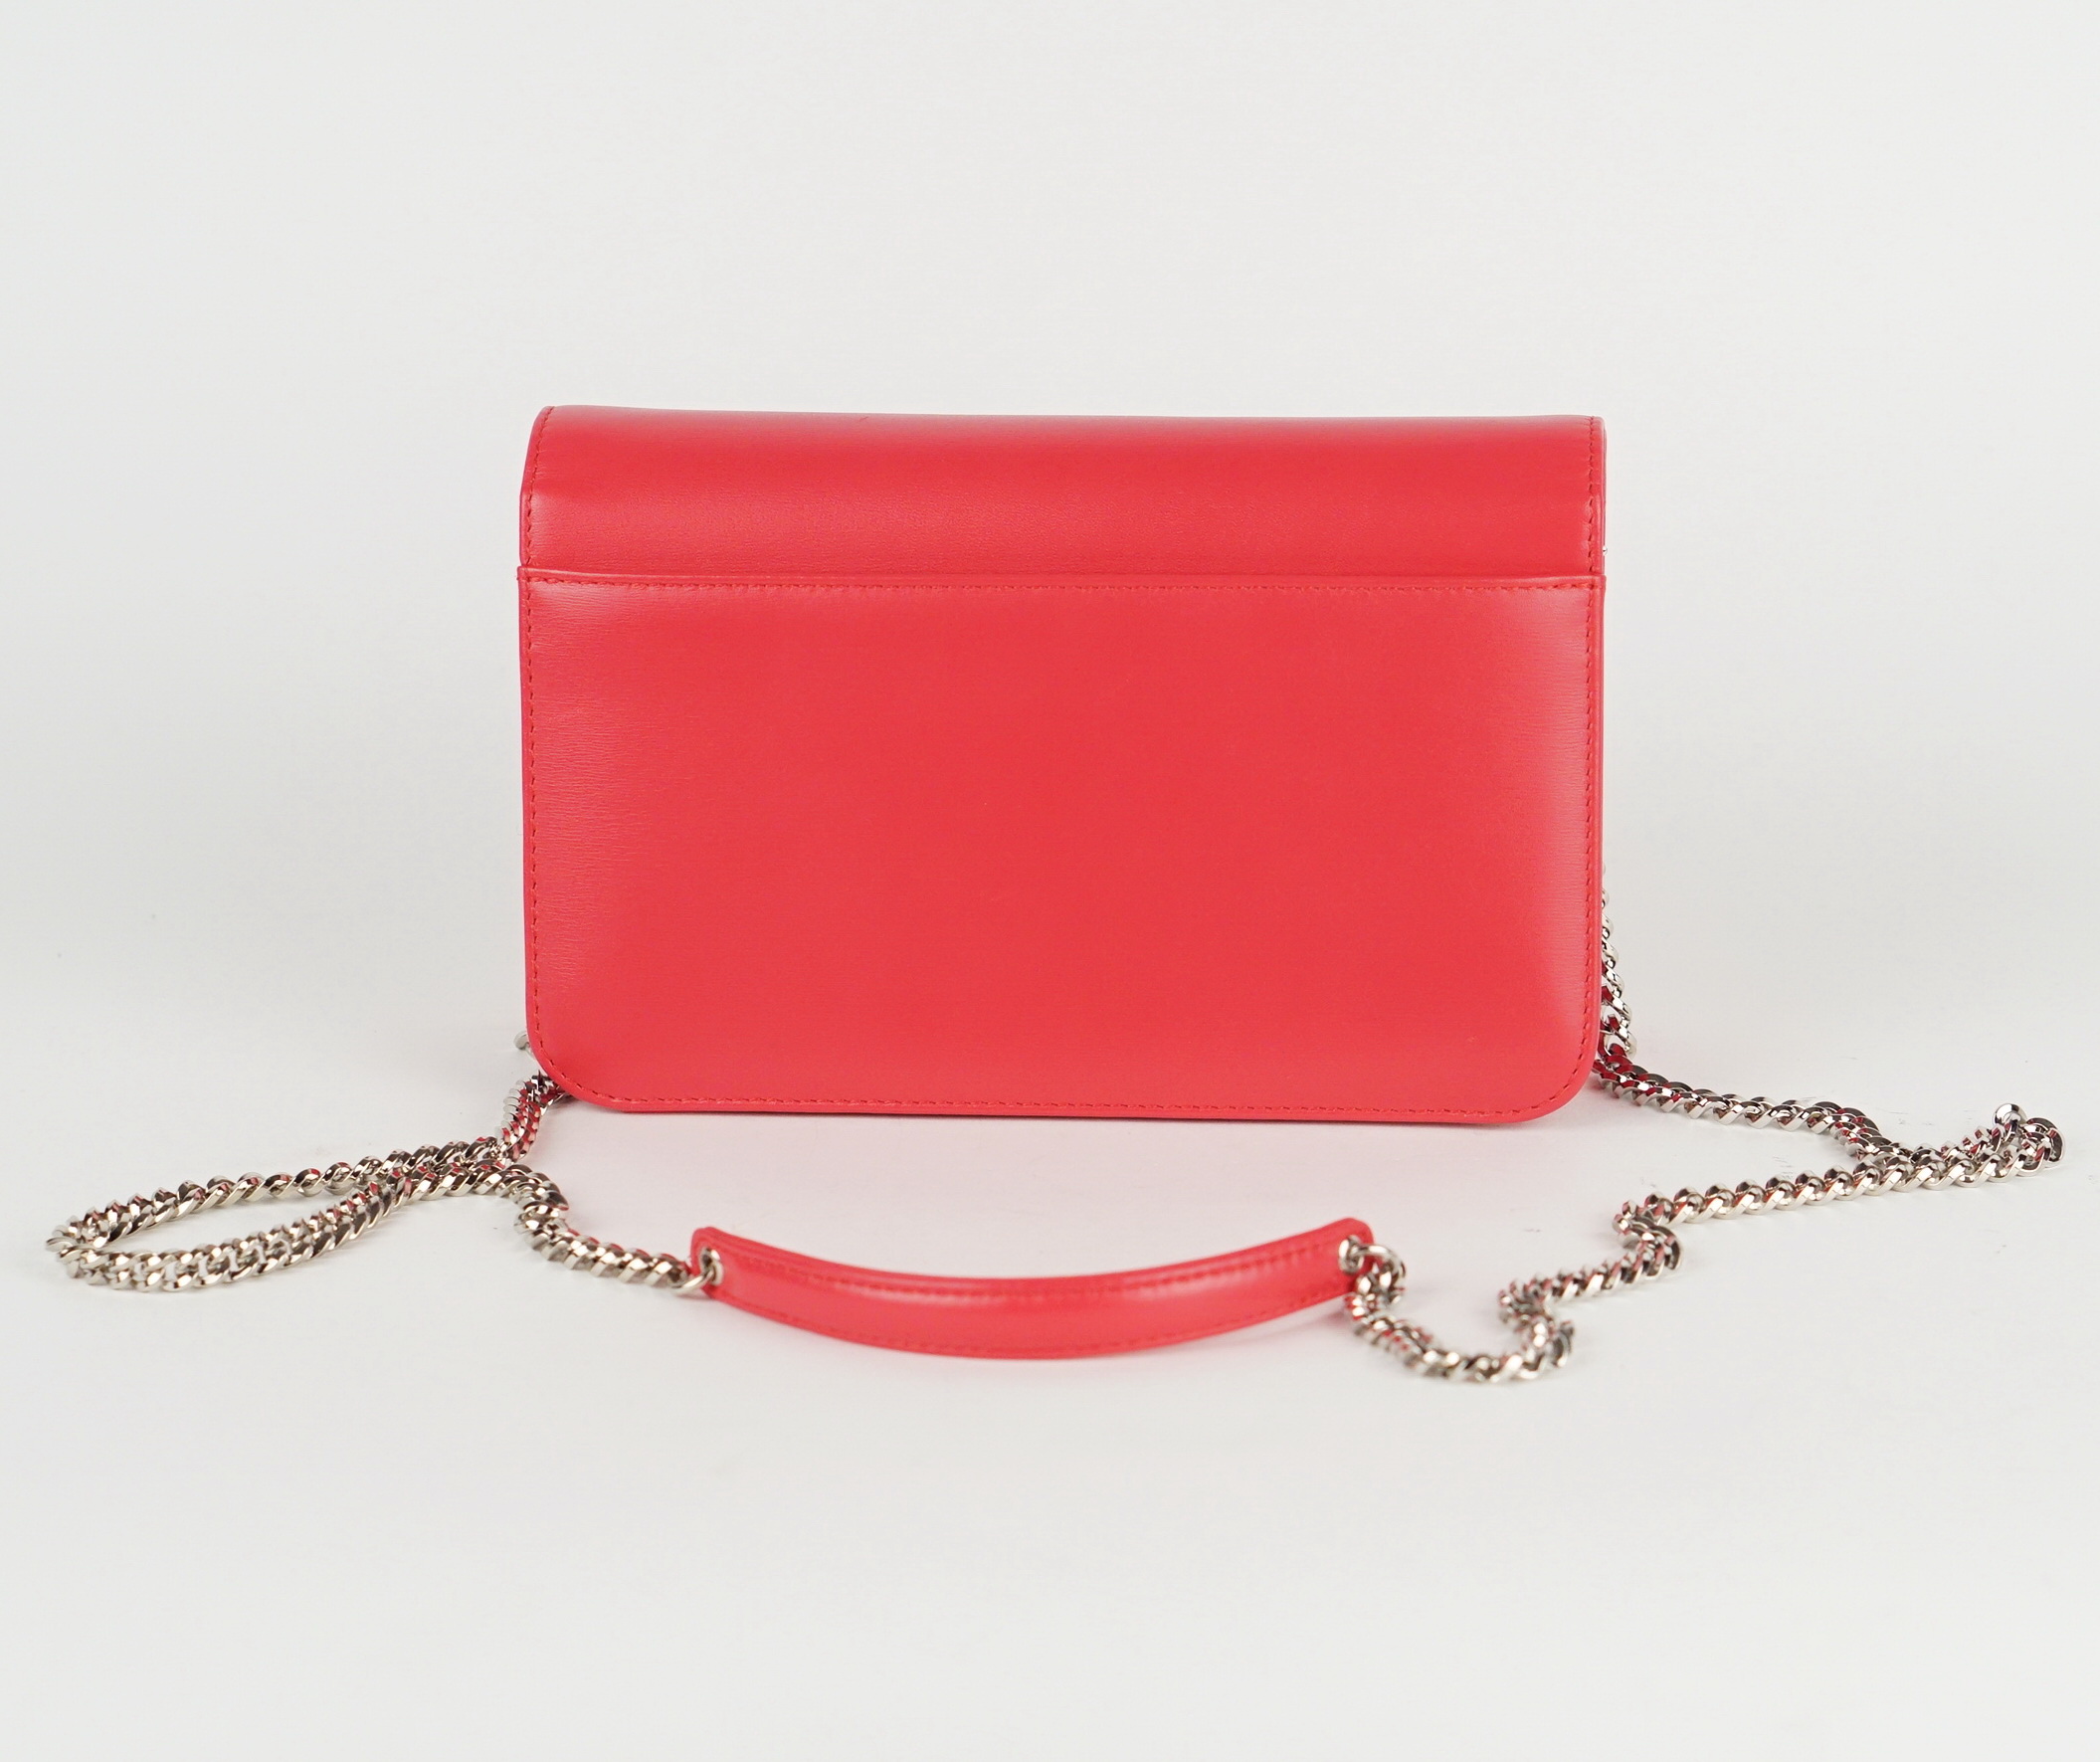  Leather Bag With Detachable Chain